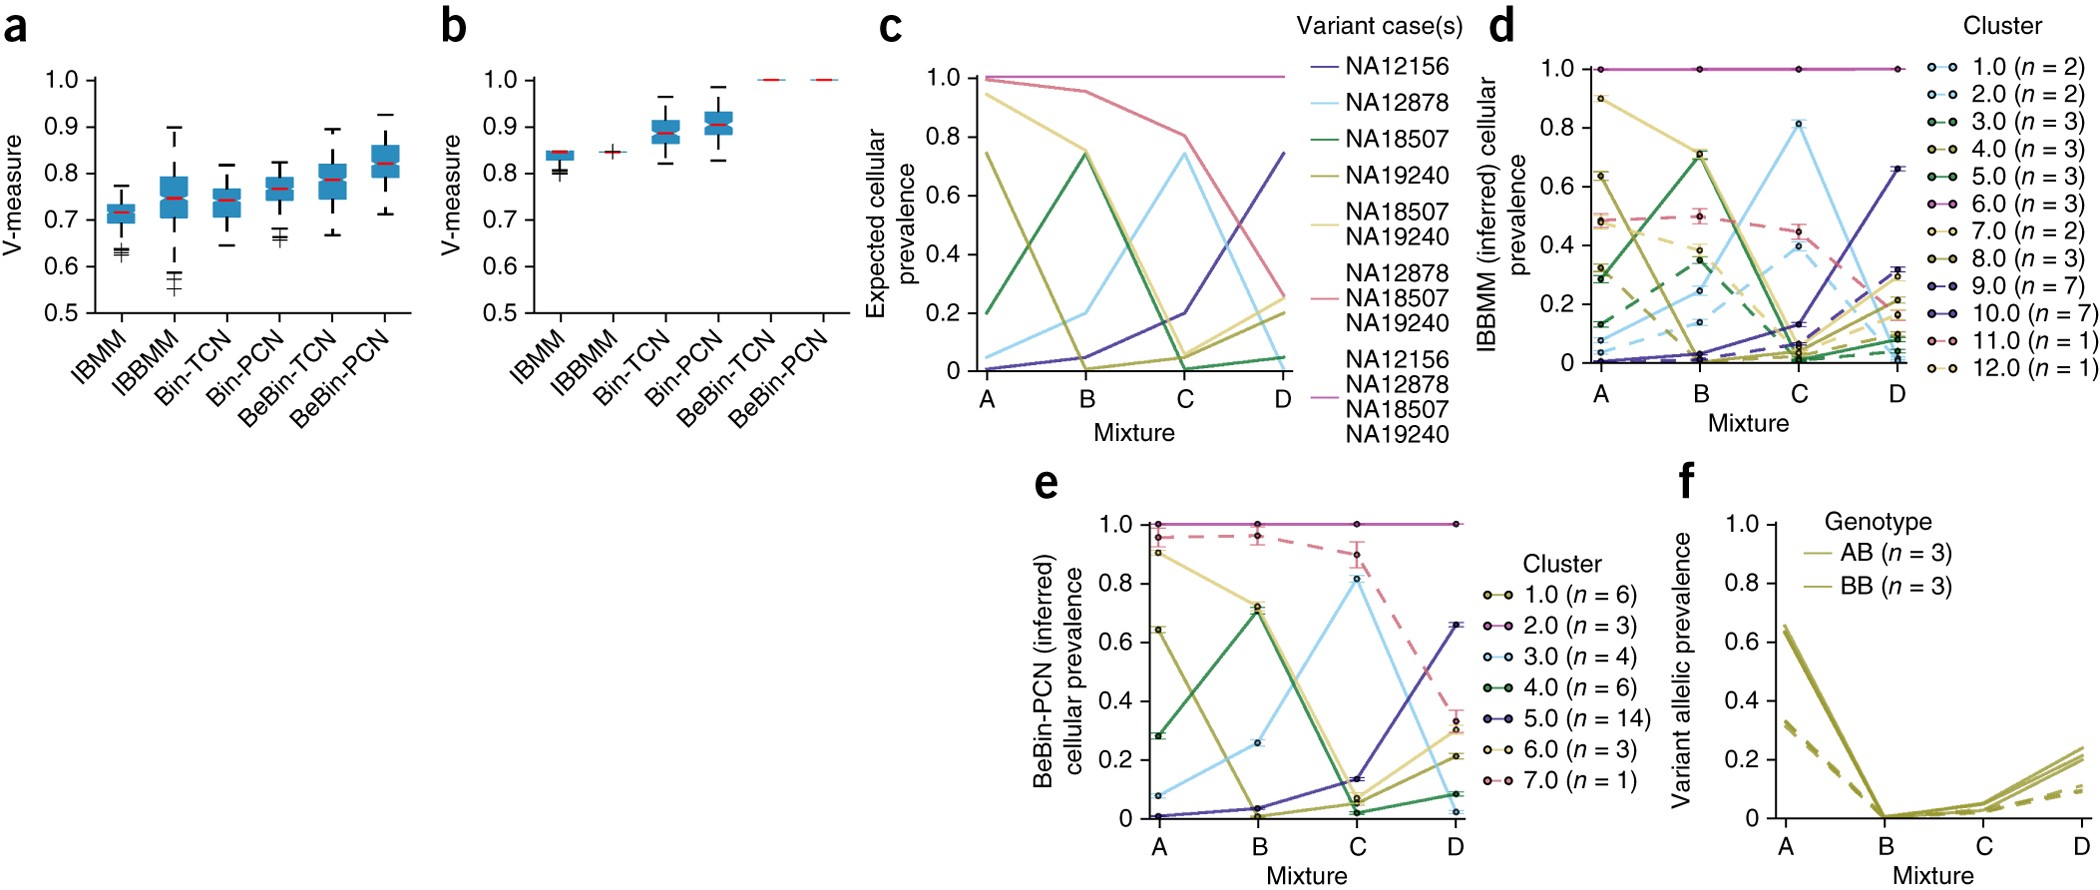 PyClone: statistical inference of clonal population structure in cancer |  Nature Methods